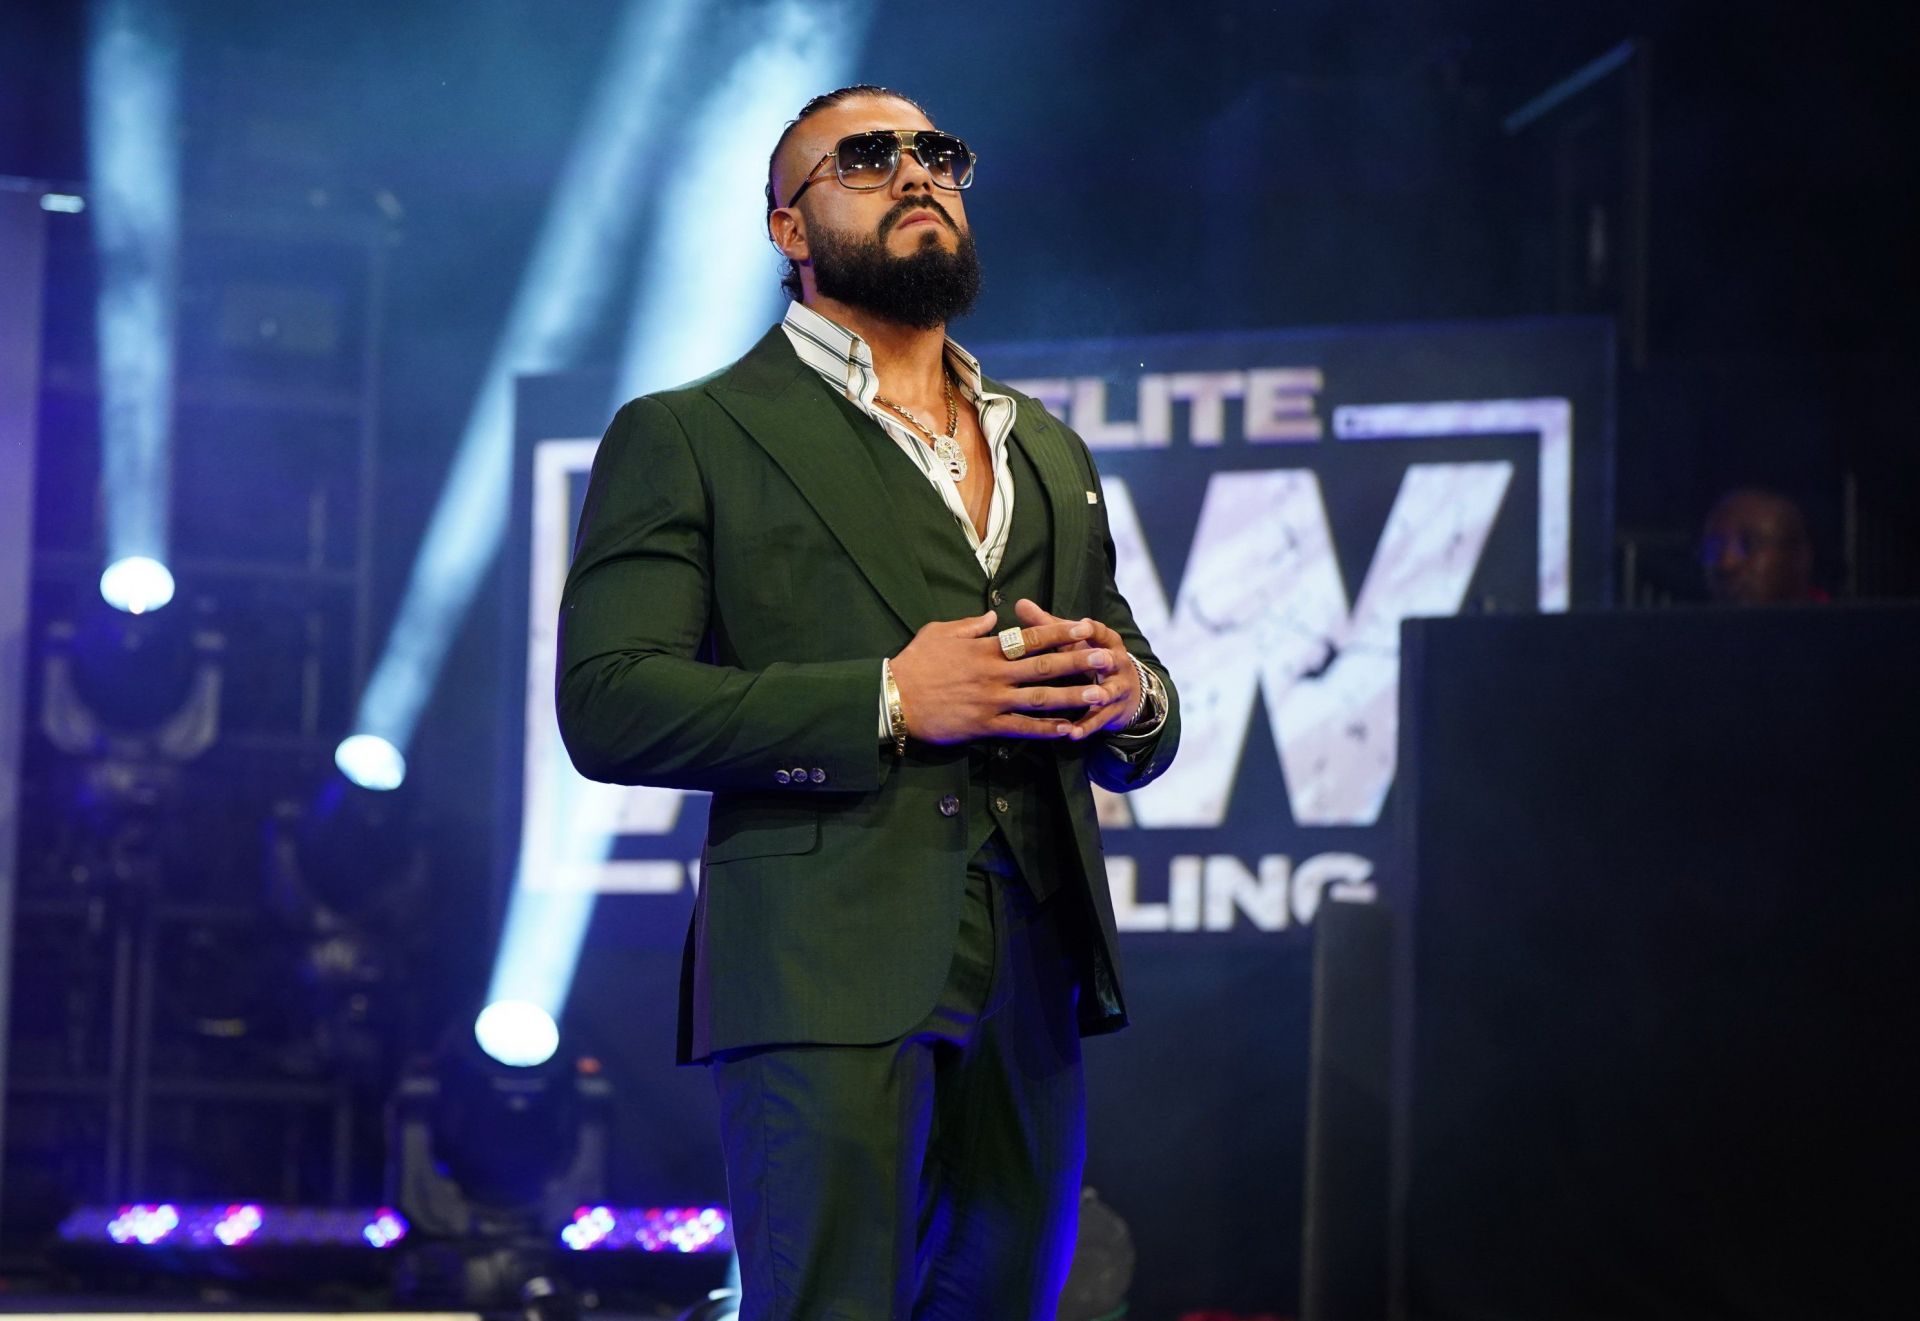 Could Andrade El Idolo be on his way out the door in AEW and back to WWE? His latest tweet may give us a clue as to what his next career direction may be.